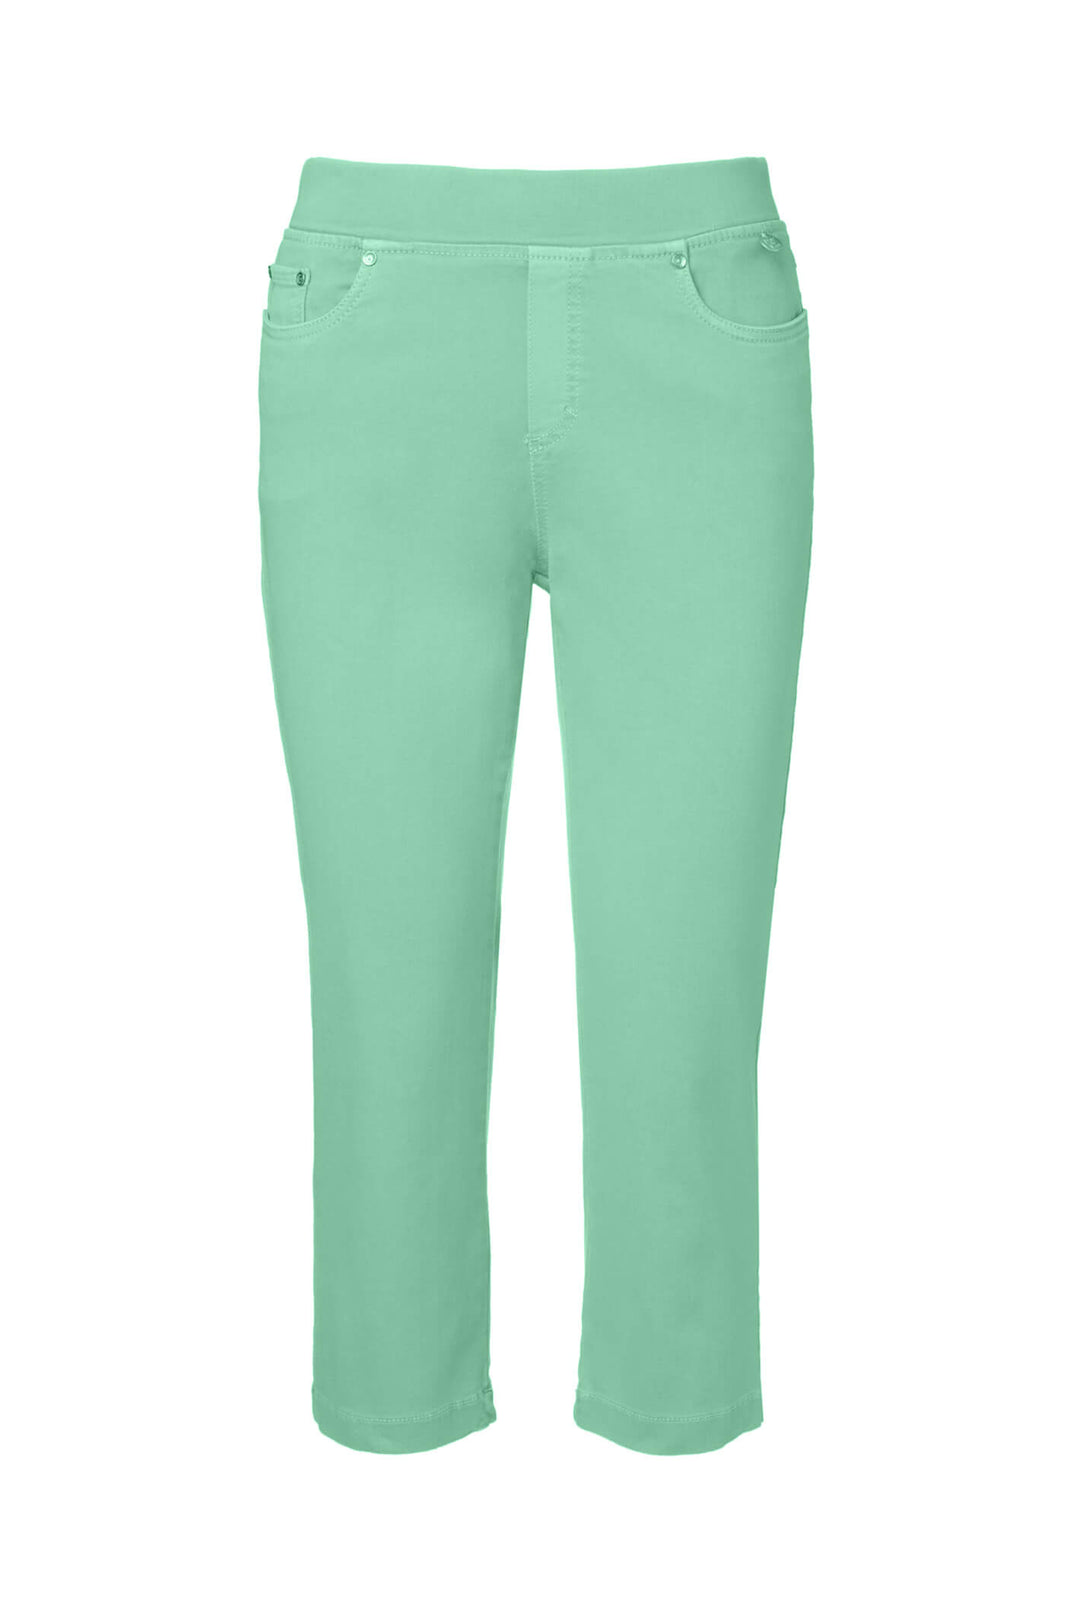 Anna Montana Angelika 1016 Jade Green Jump In Pull On Cropped Jeans - Shirley Allum Boutique